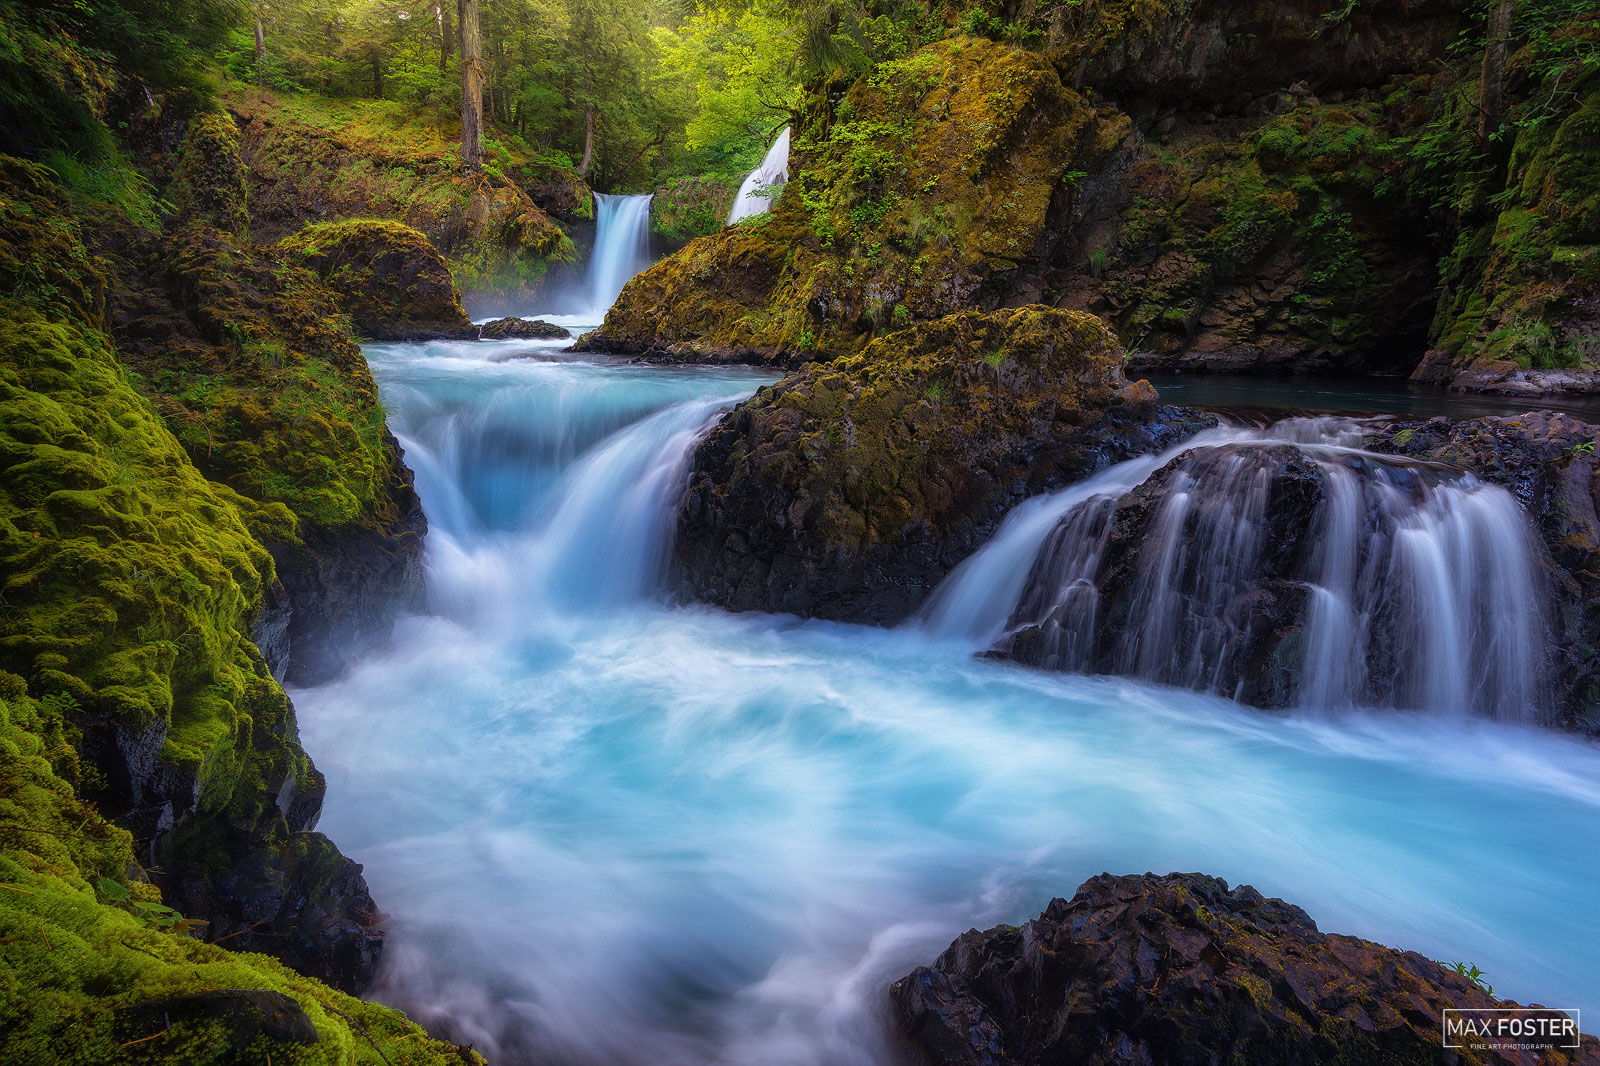 Refresh your space with Aquamarine Dream, Max Foster's limited edition photography print of Spirit Falls in the Columbia River...